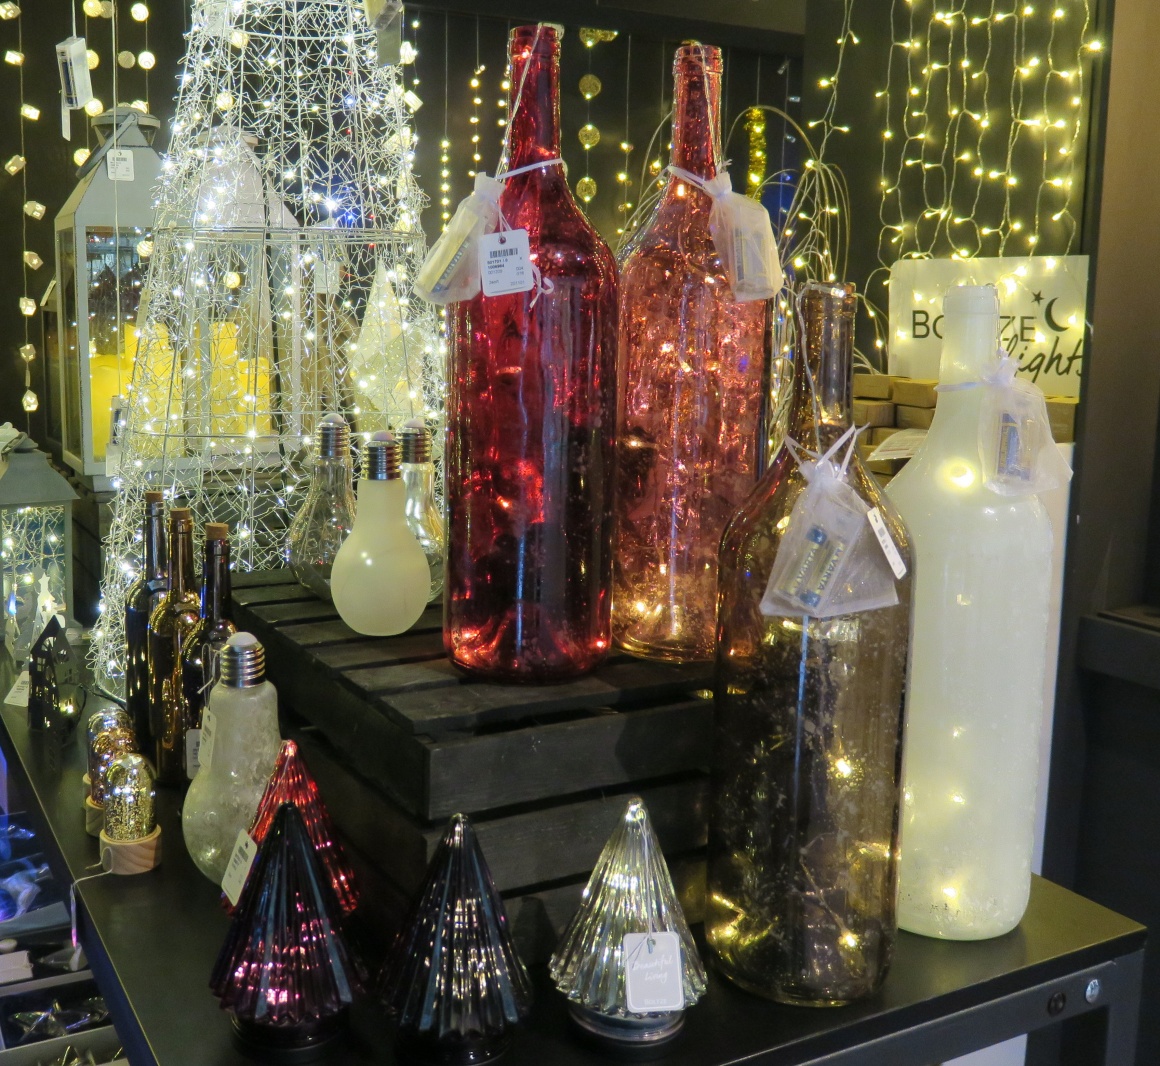 Bottles and vases with glowing lights inside; copyright: iXtenso / Pott...